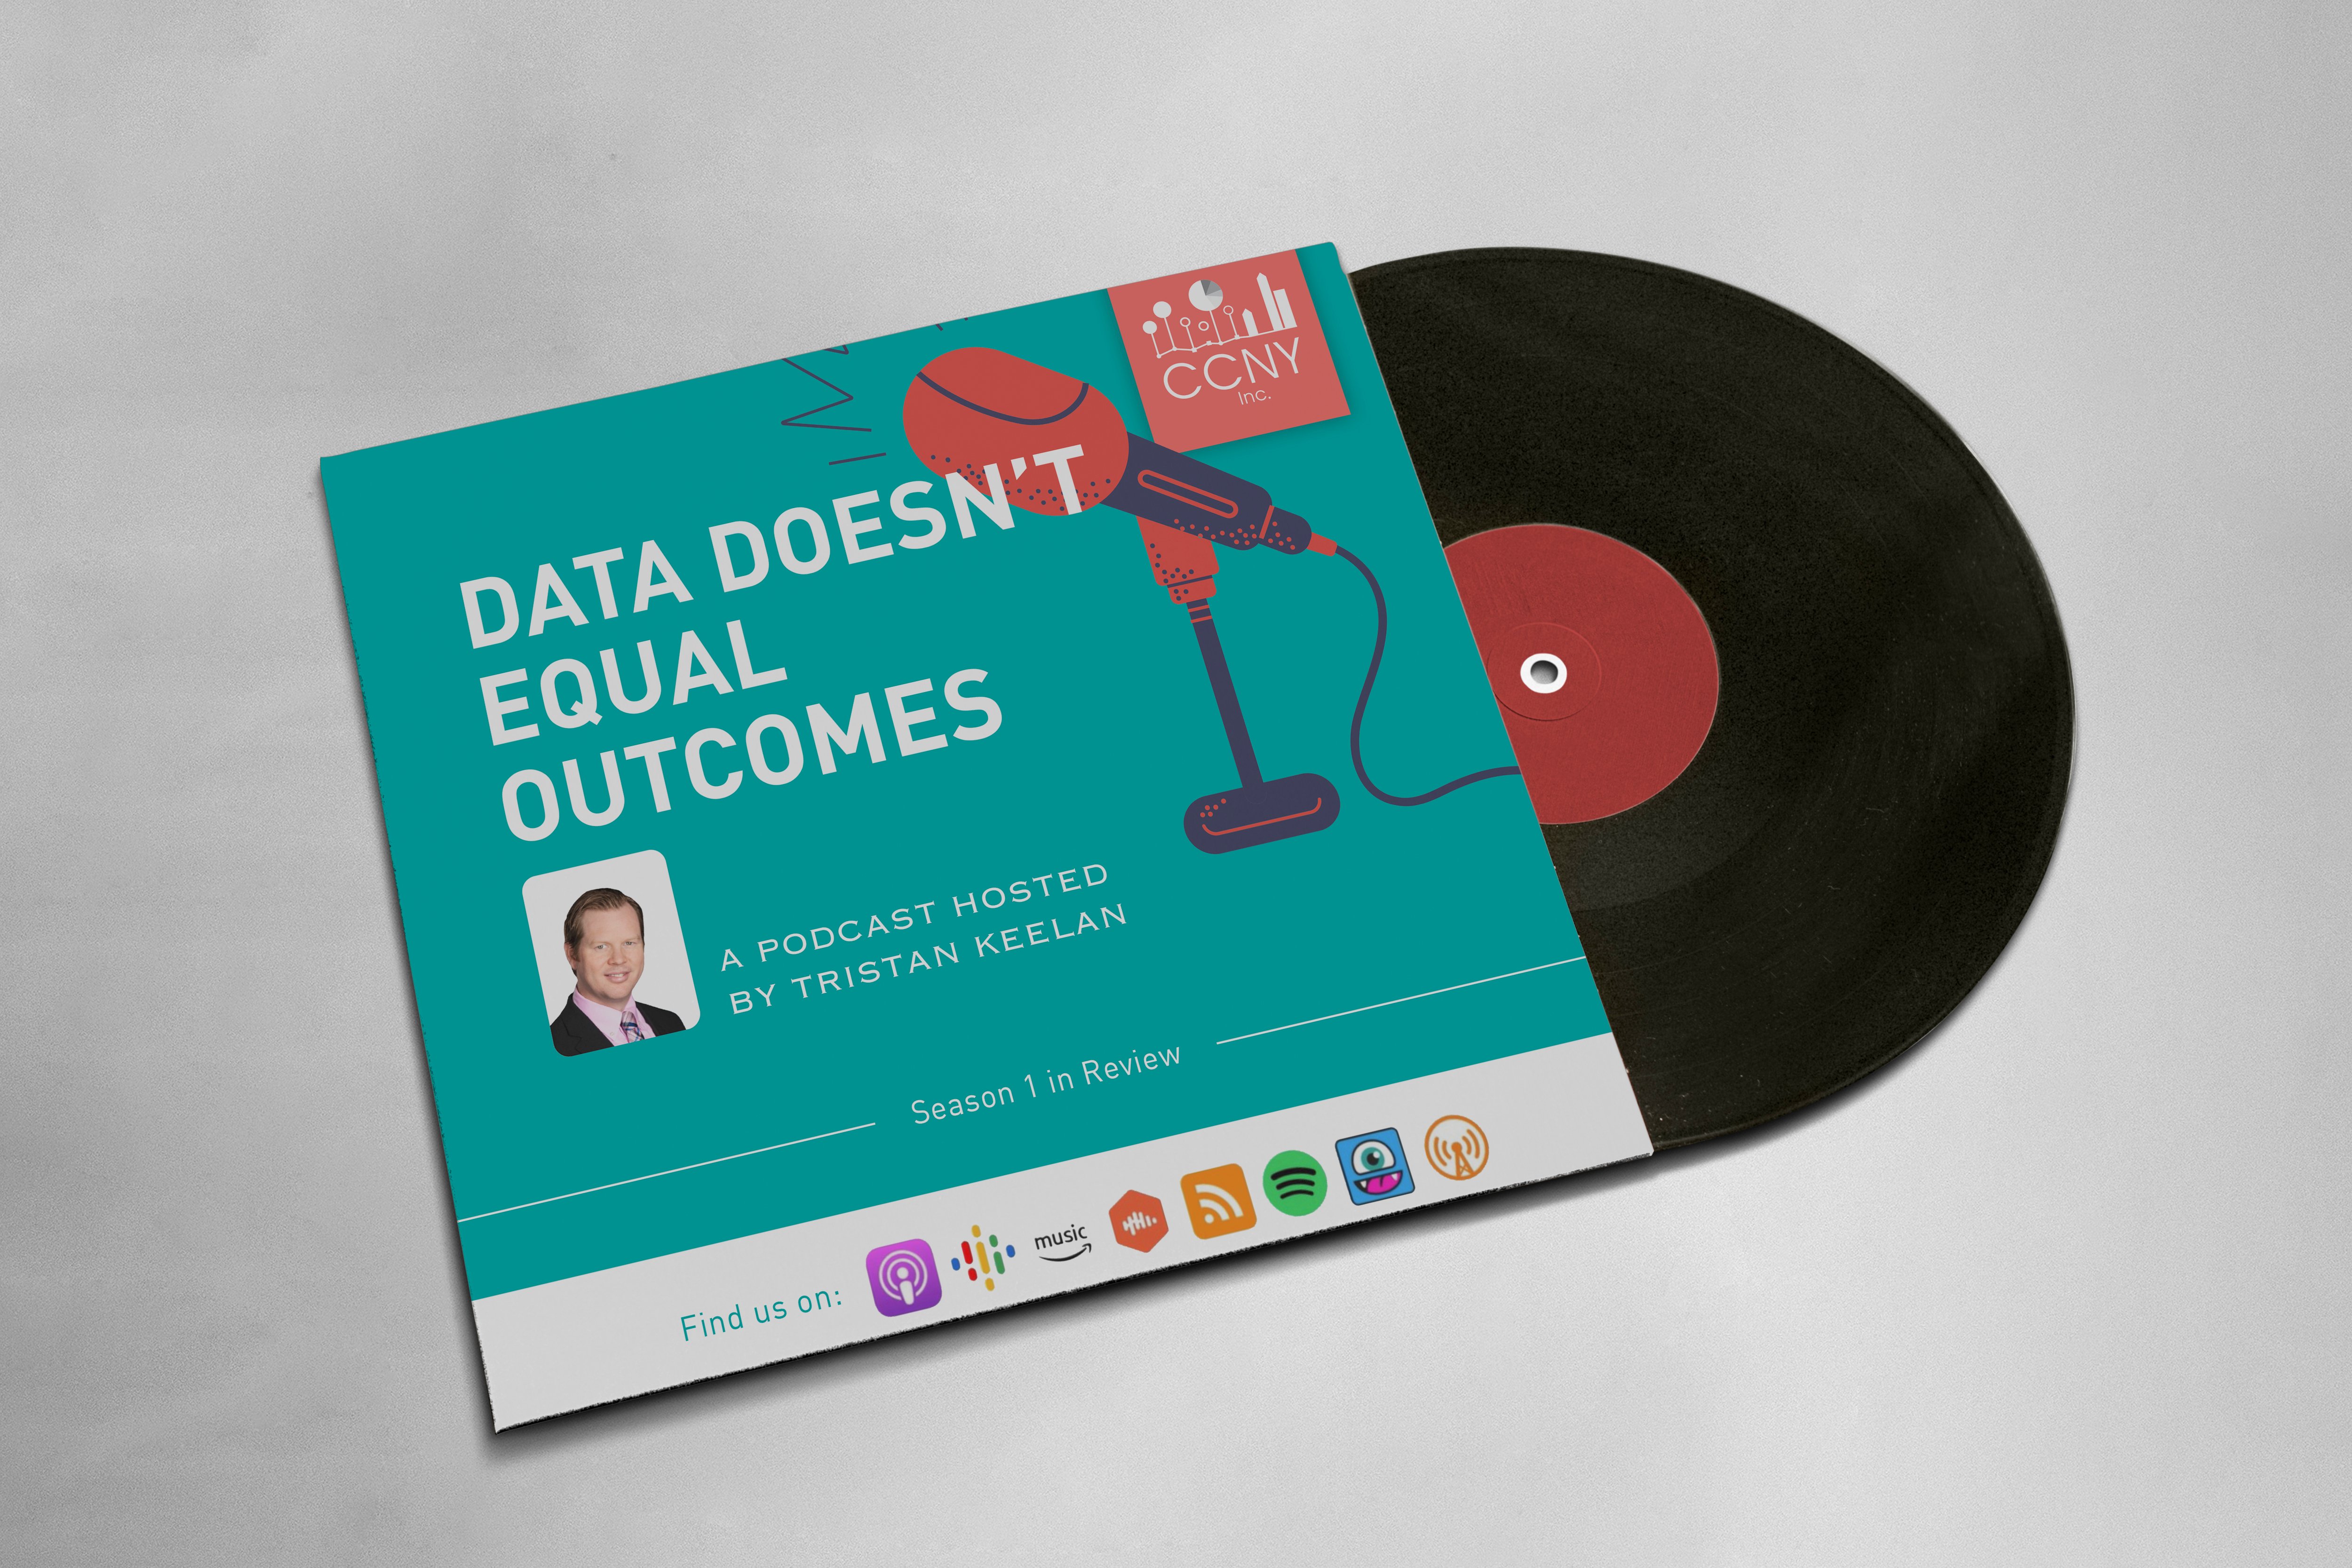 Data Doesnt Equal Outcomes Season 1 in Review Cover Image-1